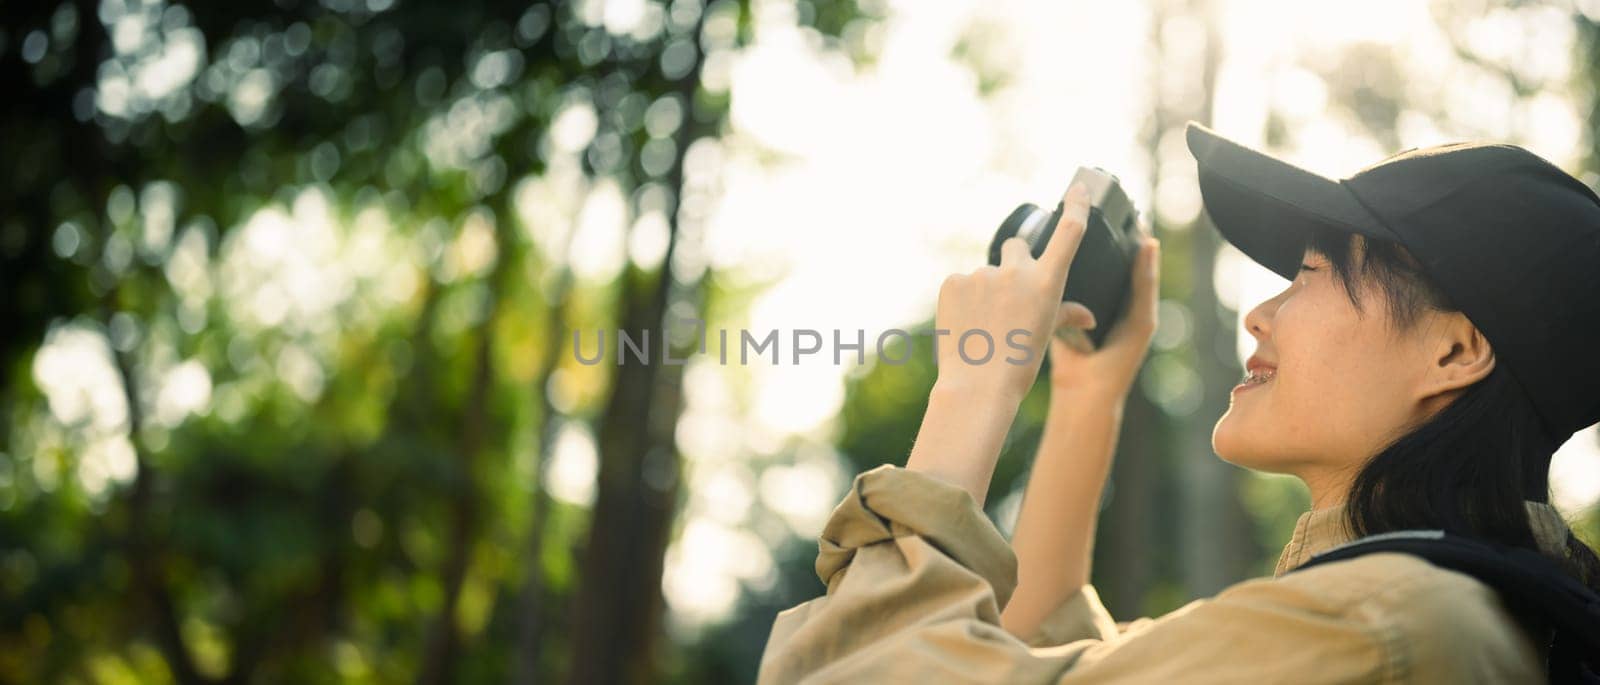 Panoramic photo of smiling female traveller taking photo with camera in nature. Holiday, travel and lifestyle concept by prathanchorruangsak